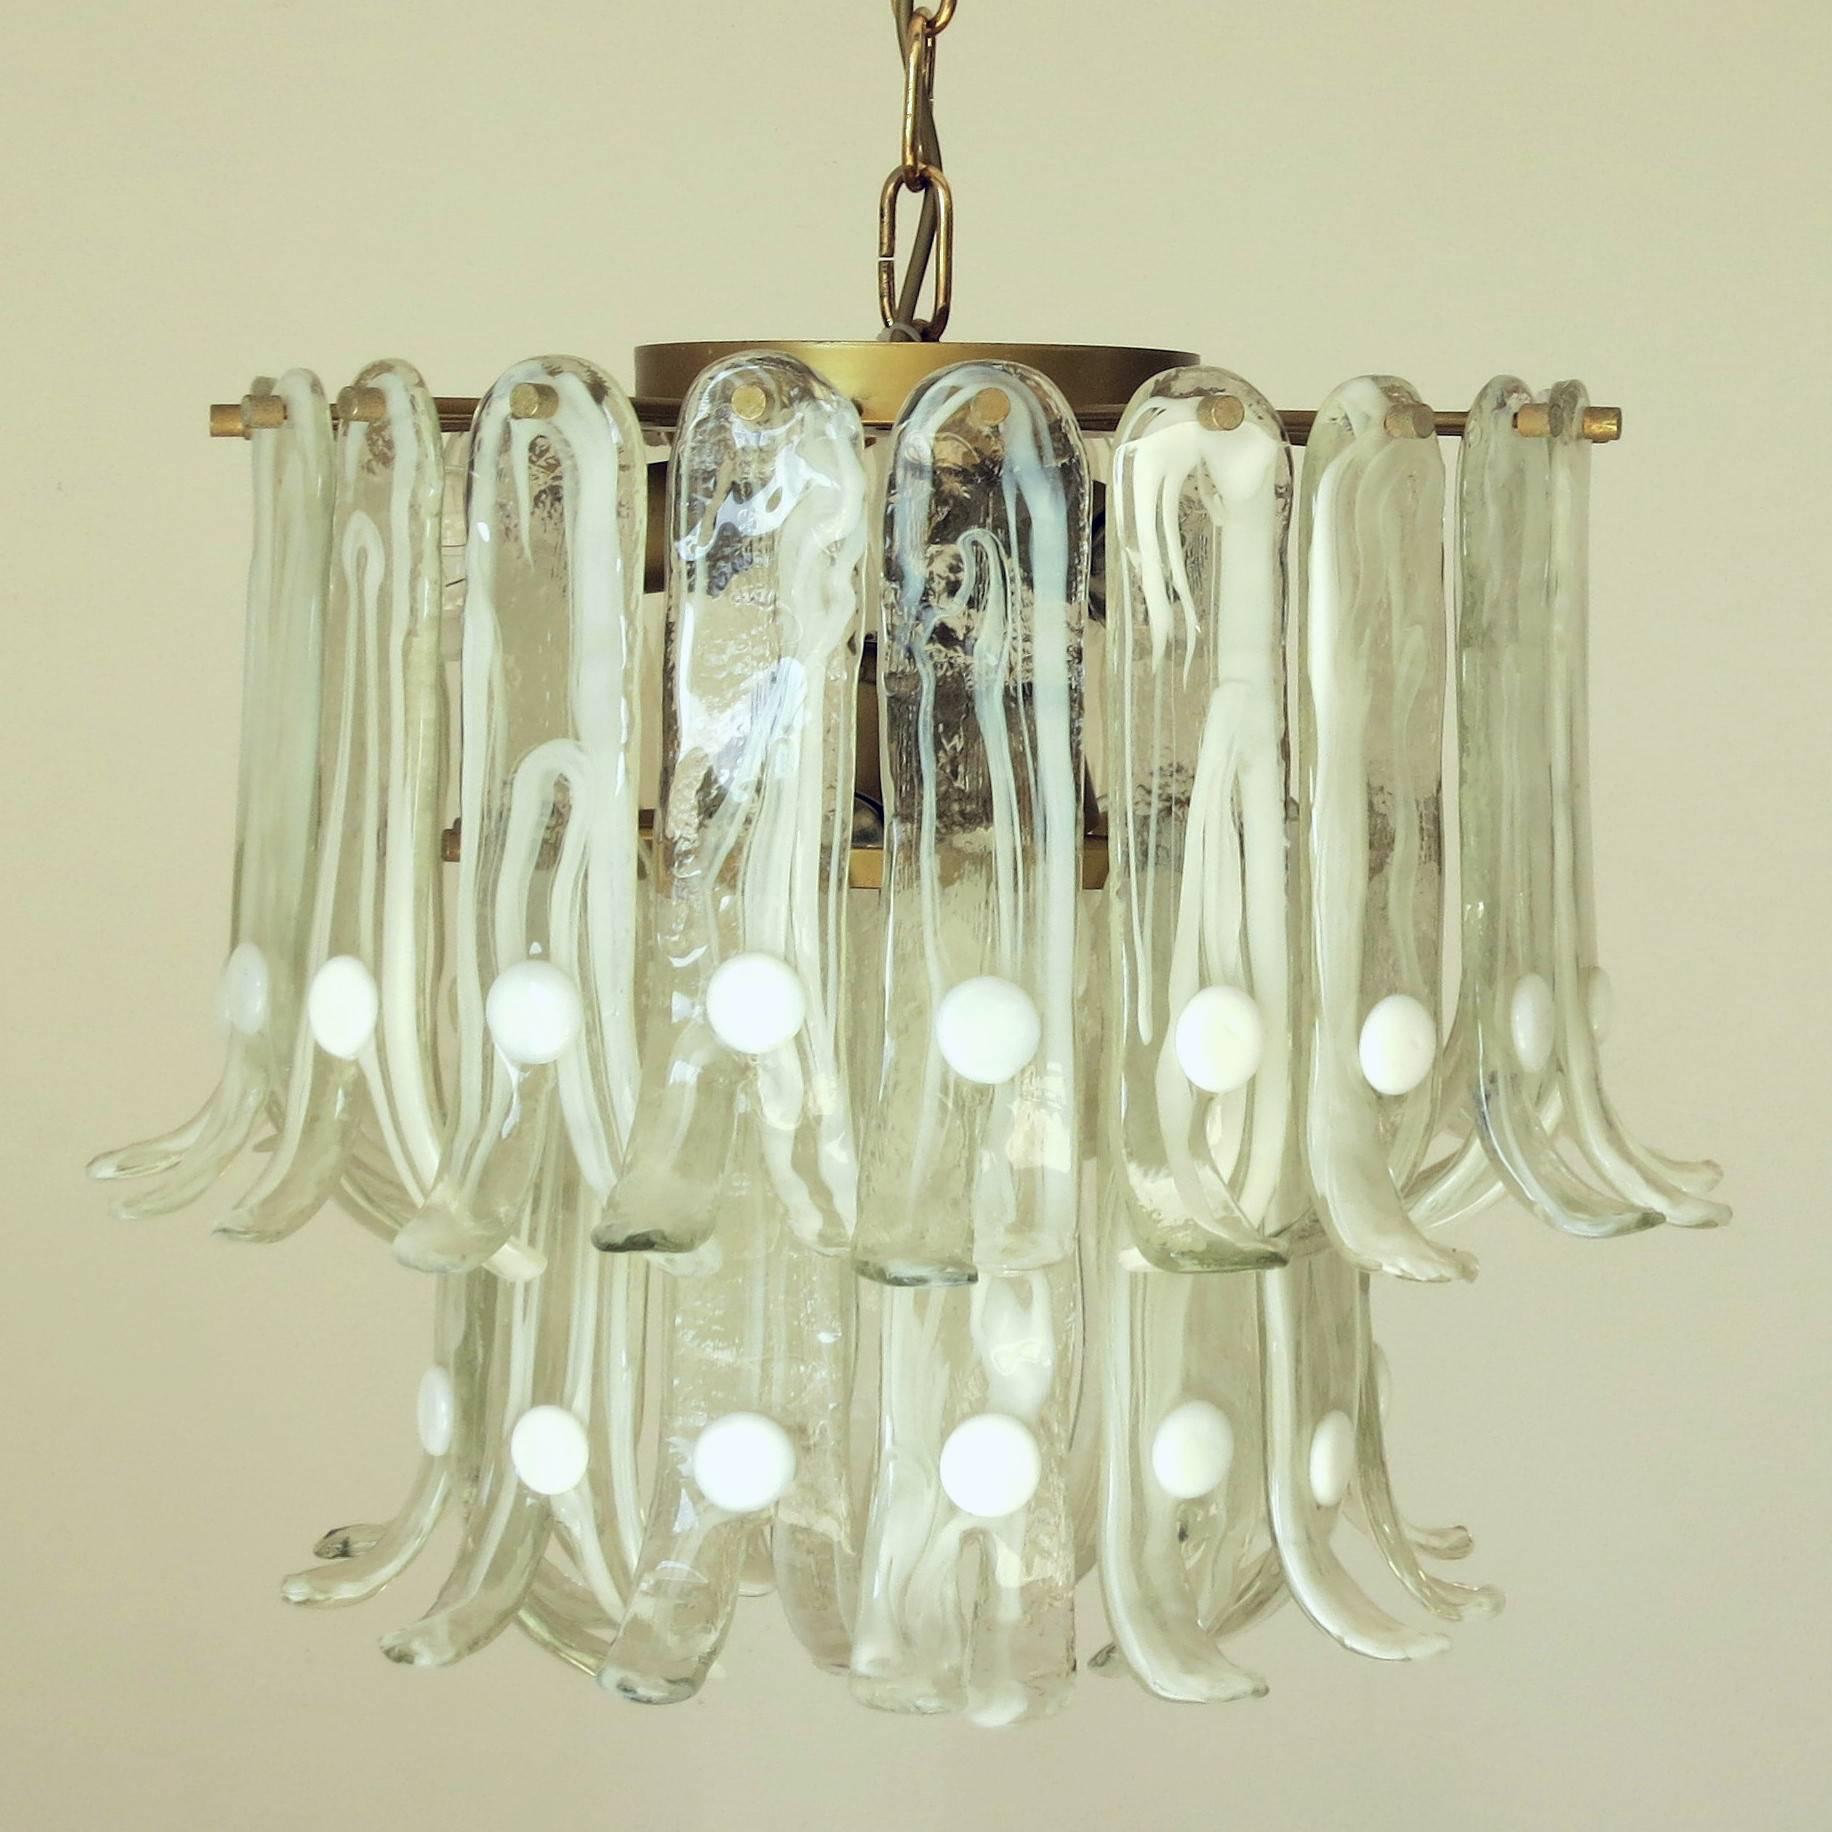 Vintage Italian chandelier with pale green Murano glass petals hand blown with diffused white details and split ends, mounted on brass frame / Designed by Mazzega circa 1960’s / Made in Italy
** Please note 1 glass has minor damage, see the last